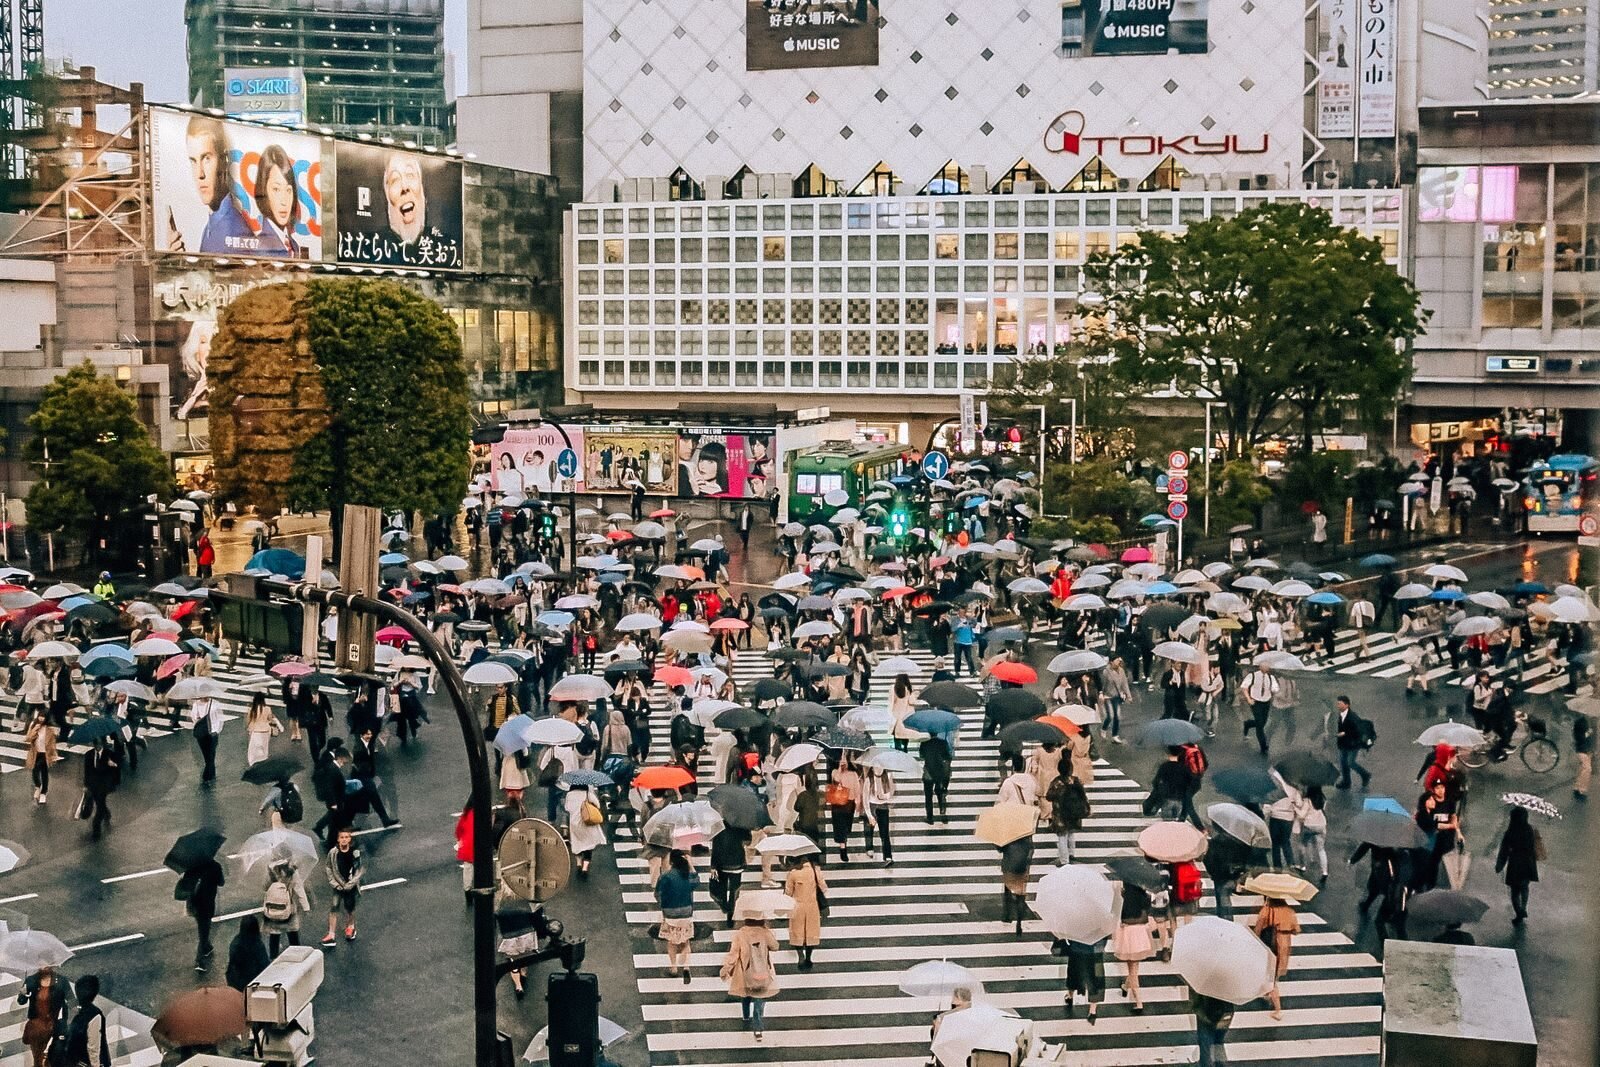 Many people with umbrellas crossing the road at Shibuya Crossing in Tokyo